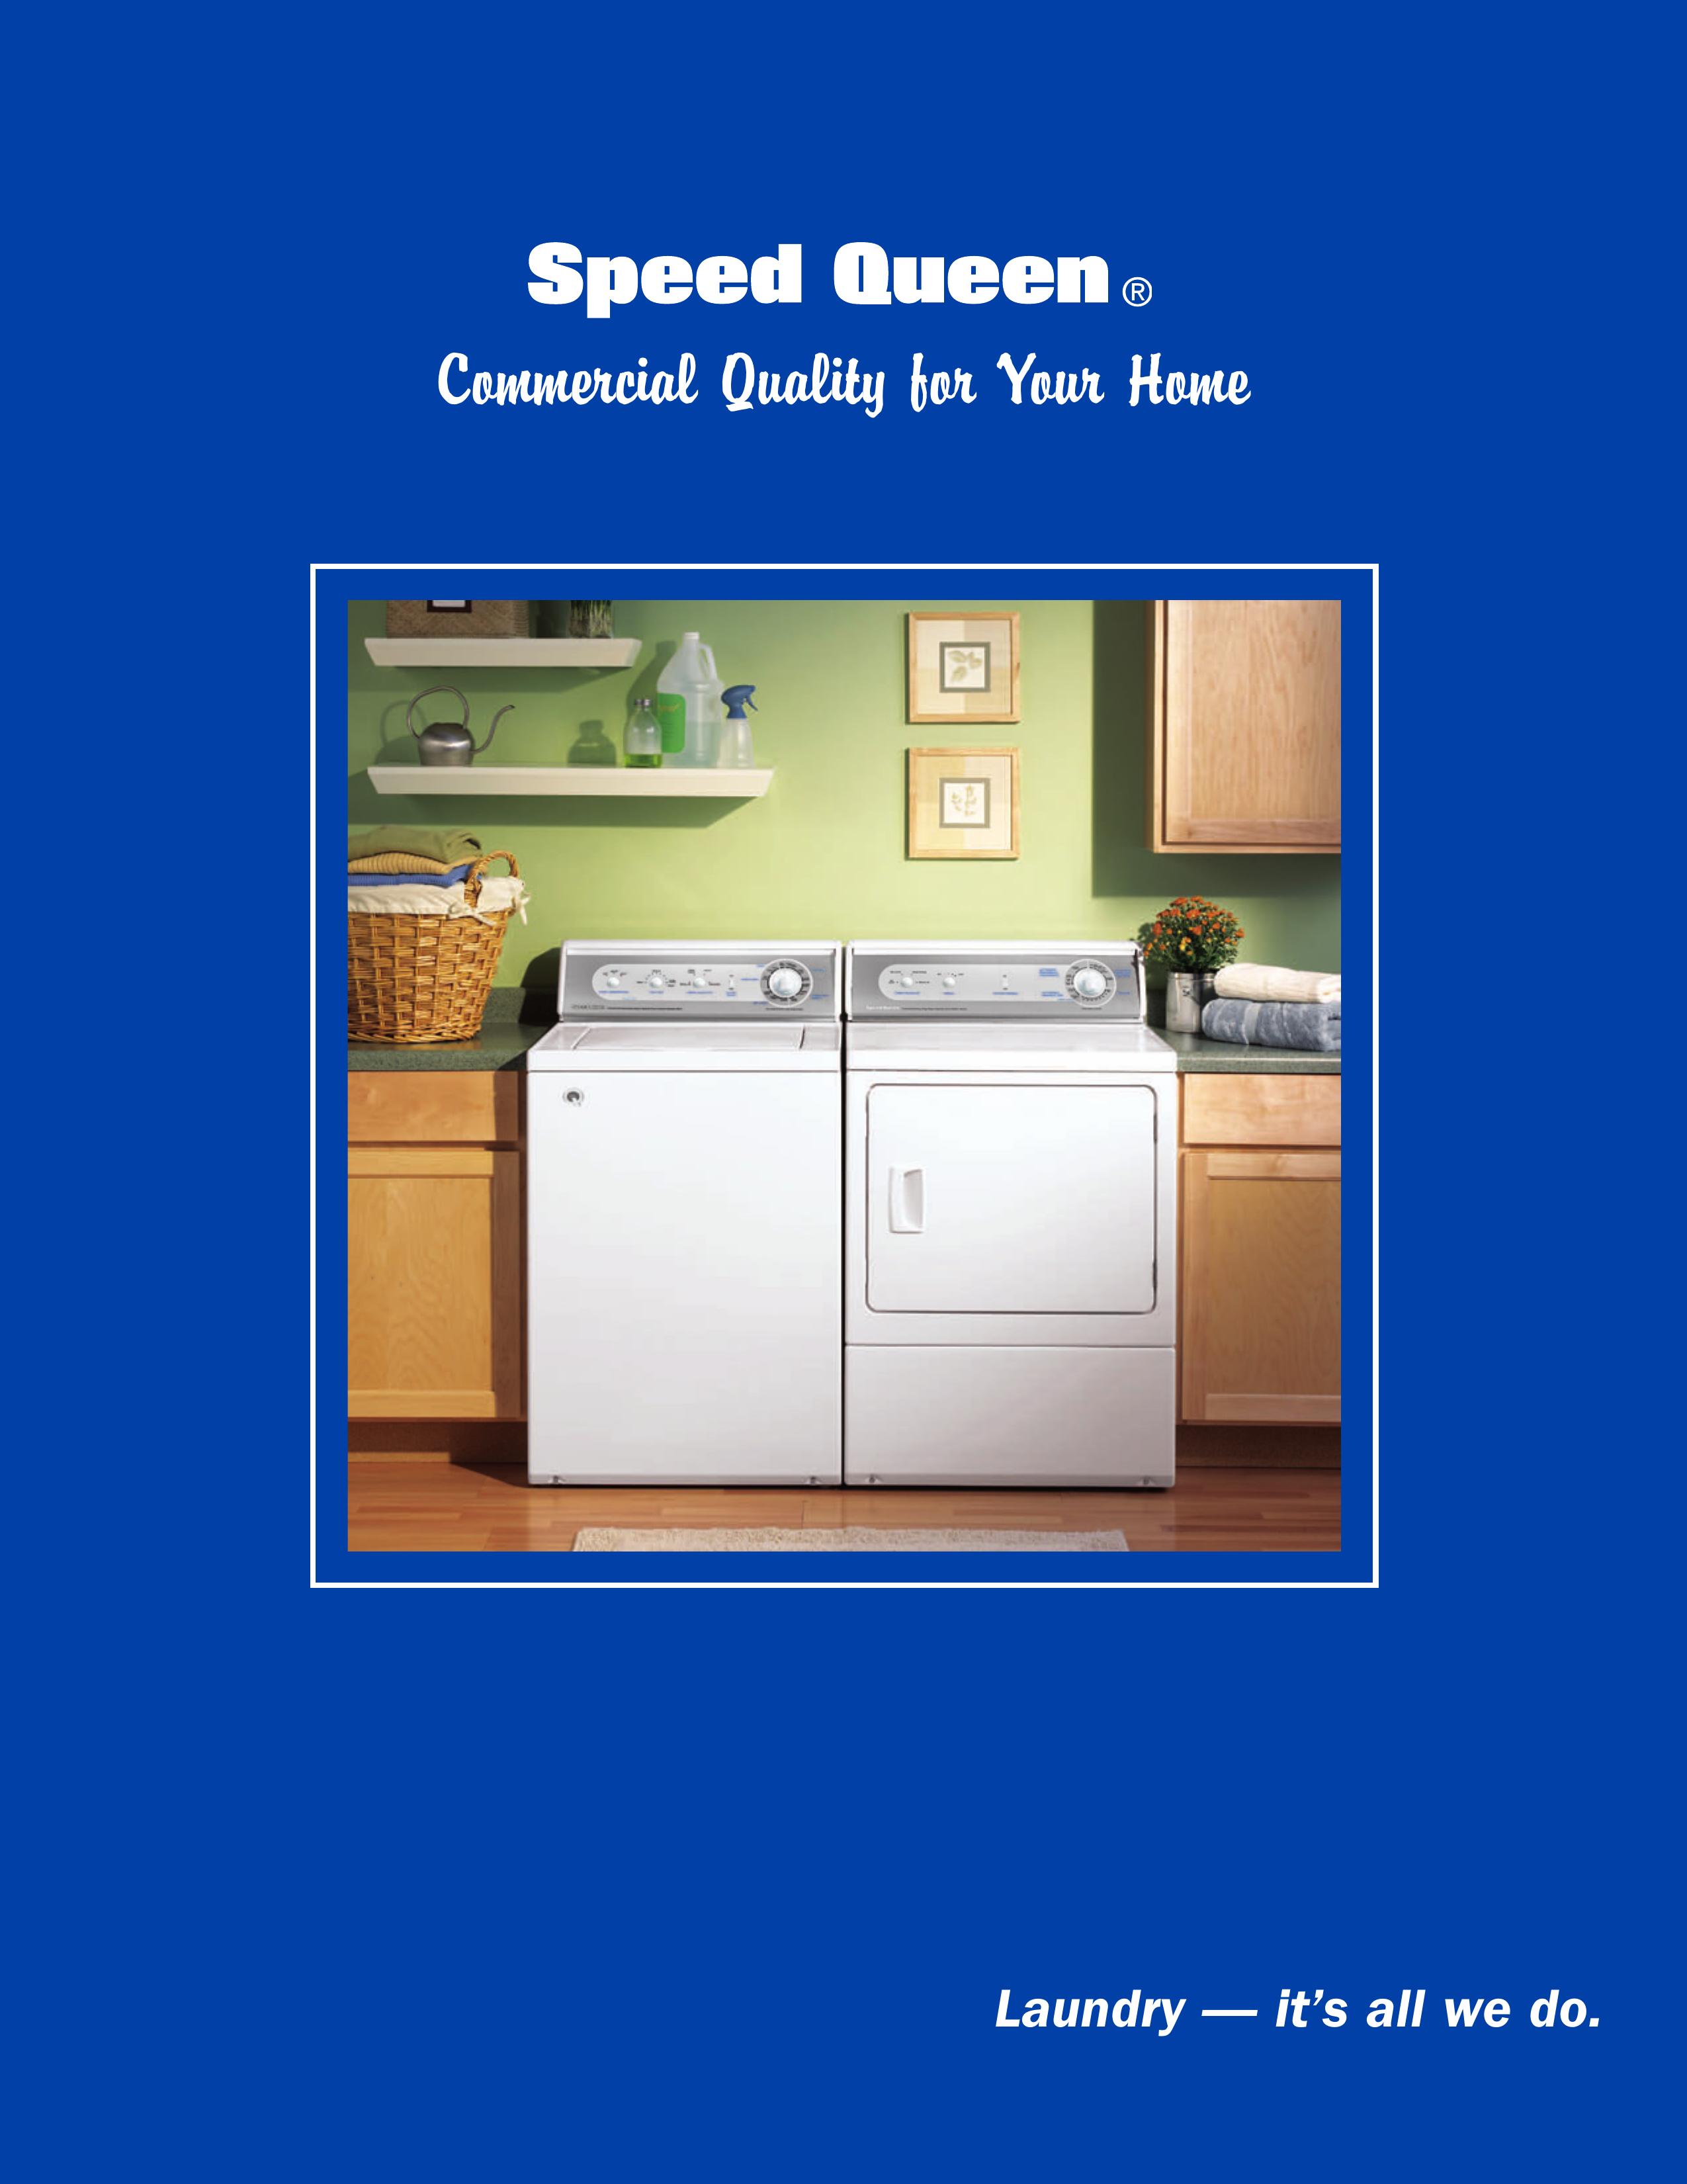 Speed Queen Home Laundry Washer/Dryer User Manual